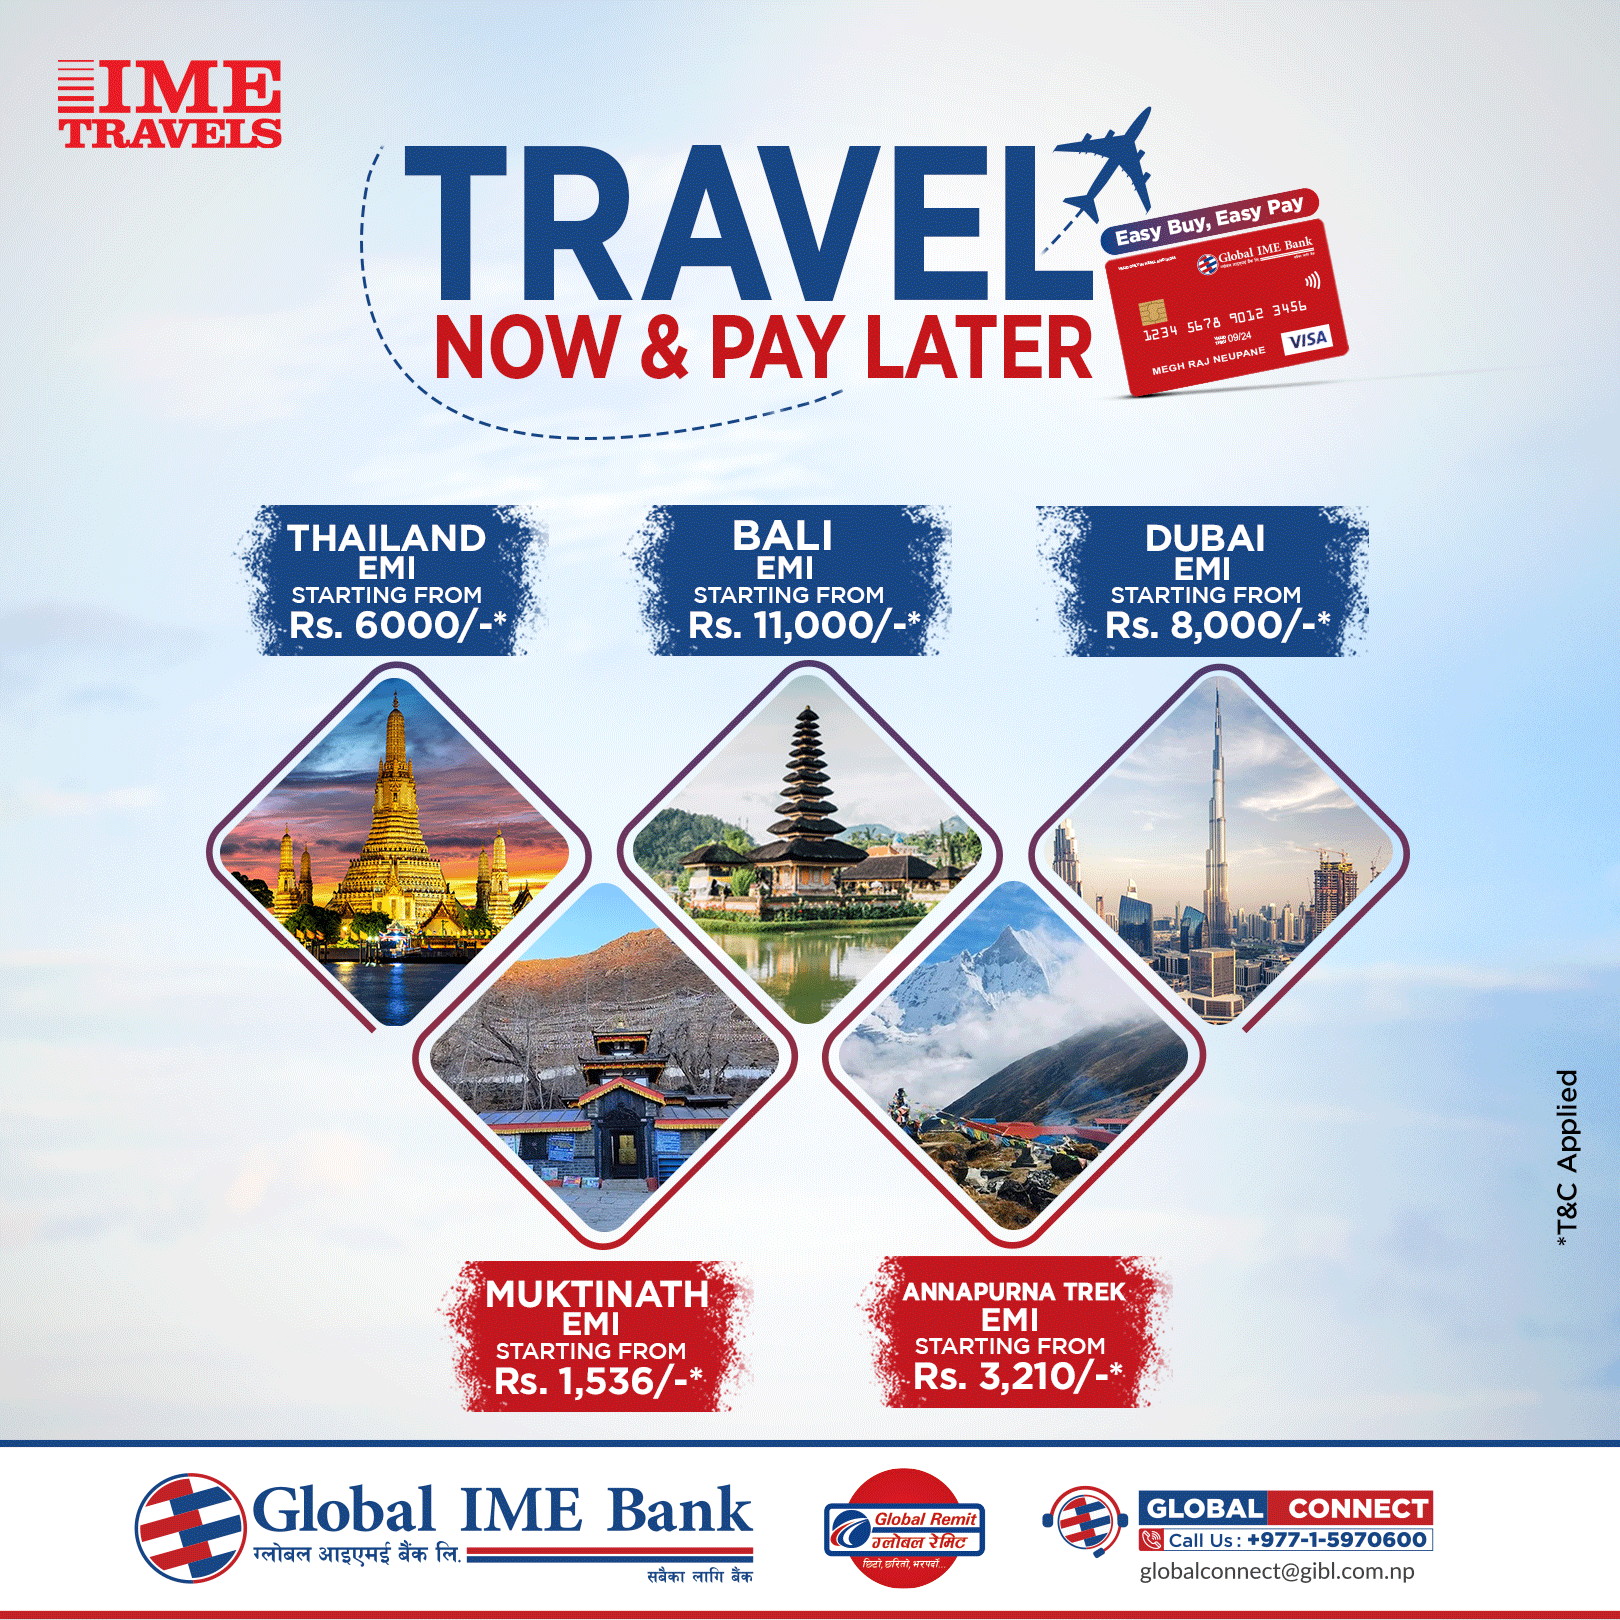 GIBL collaborates with IME Travels, credit cardholders can travel abroad for just Rs 6,000